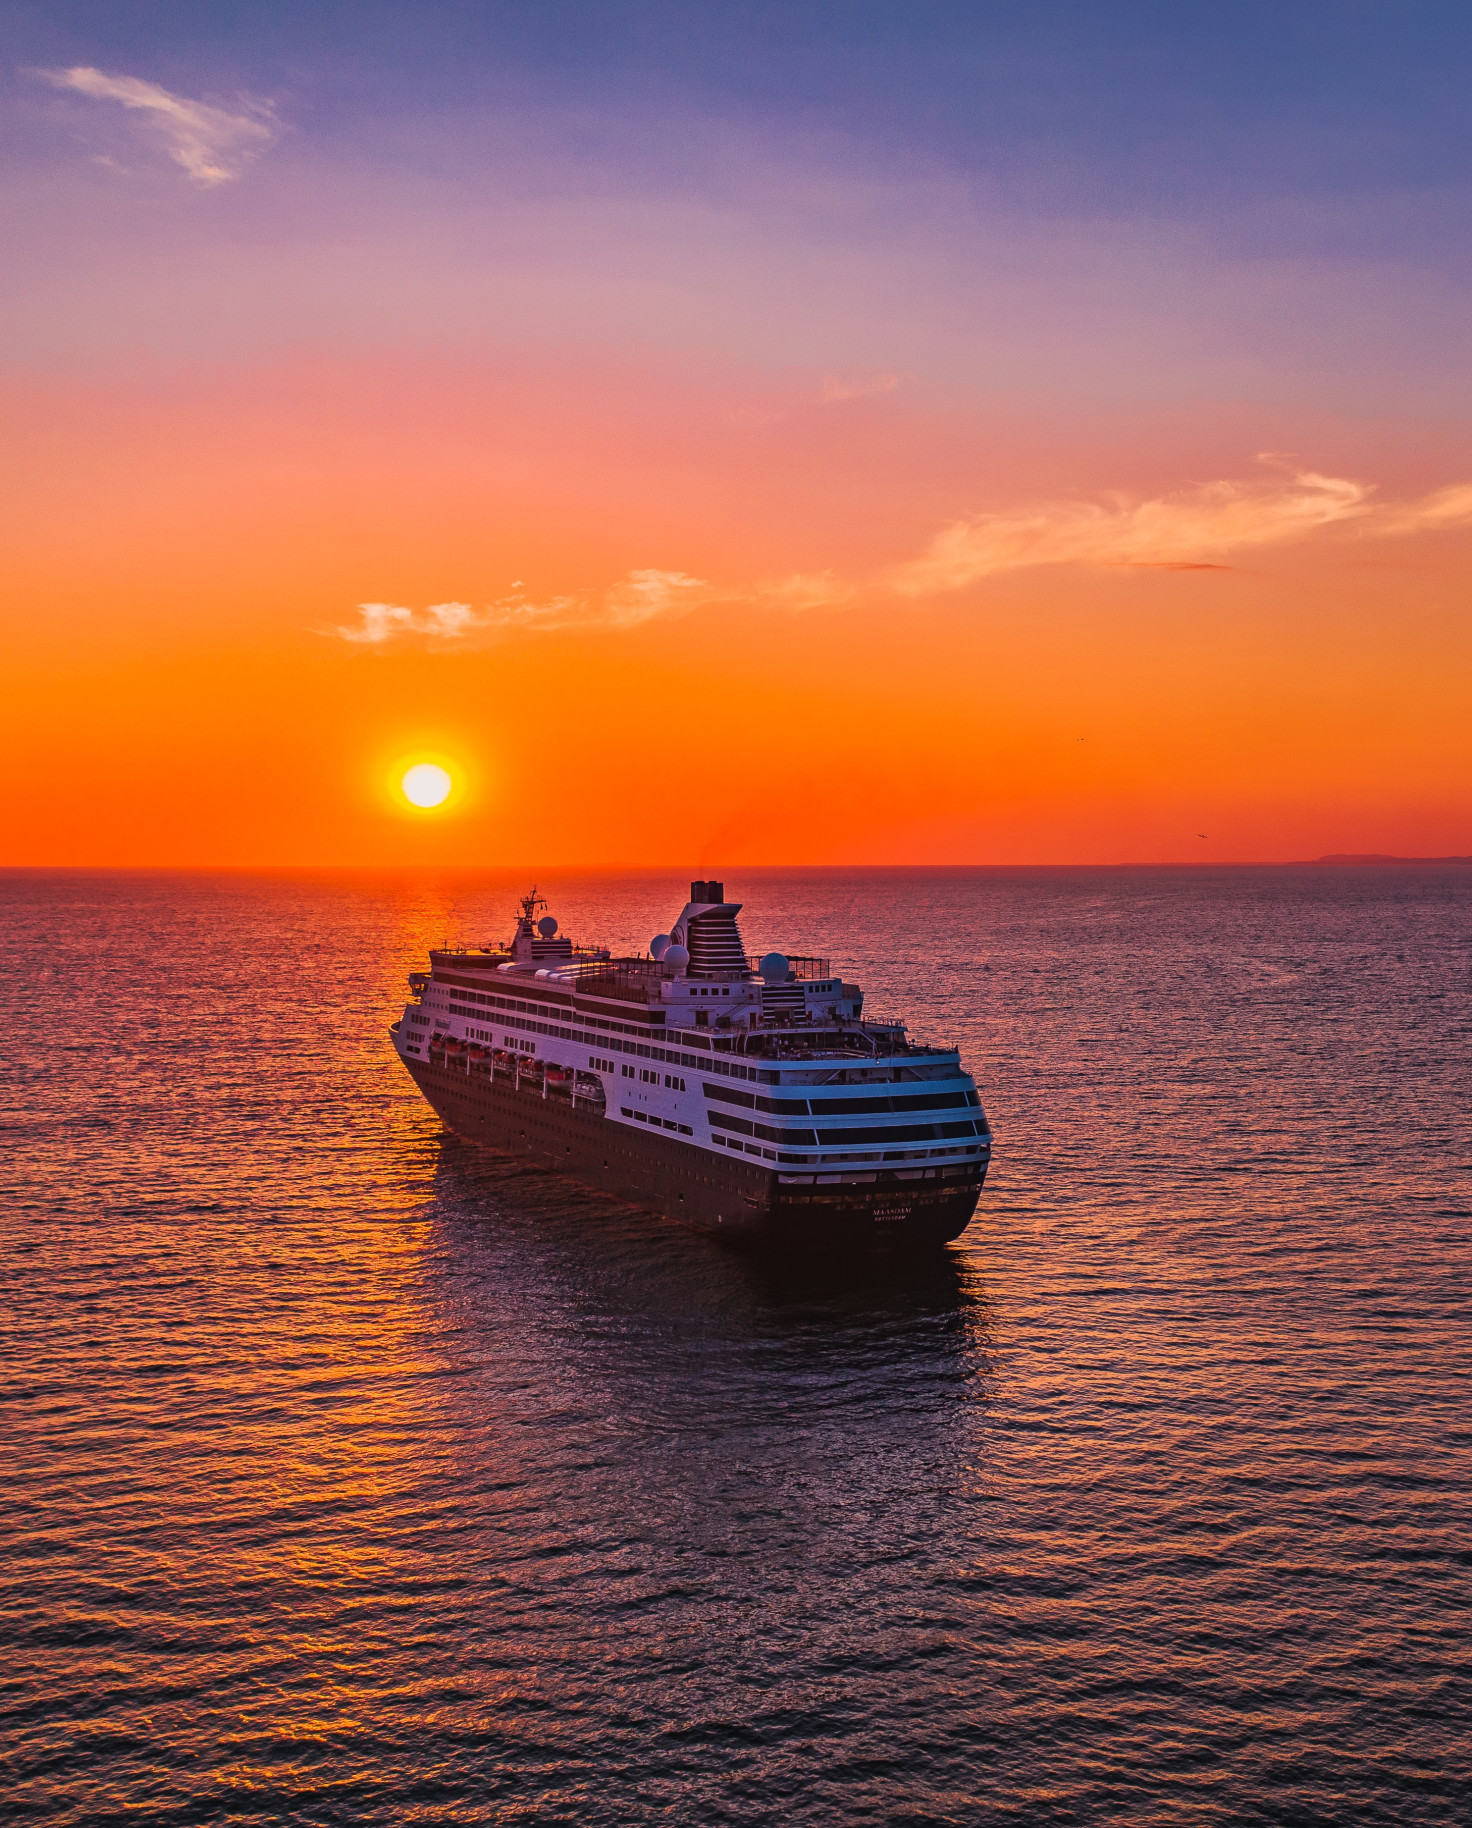 cruise ship in large body of water during sunset